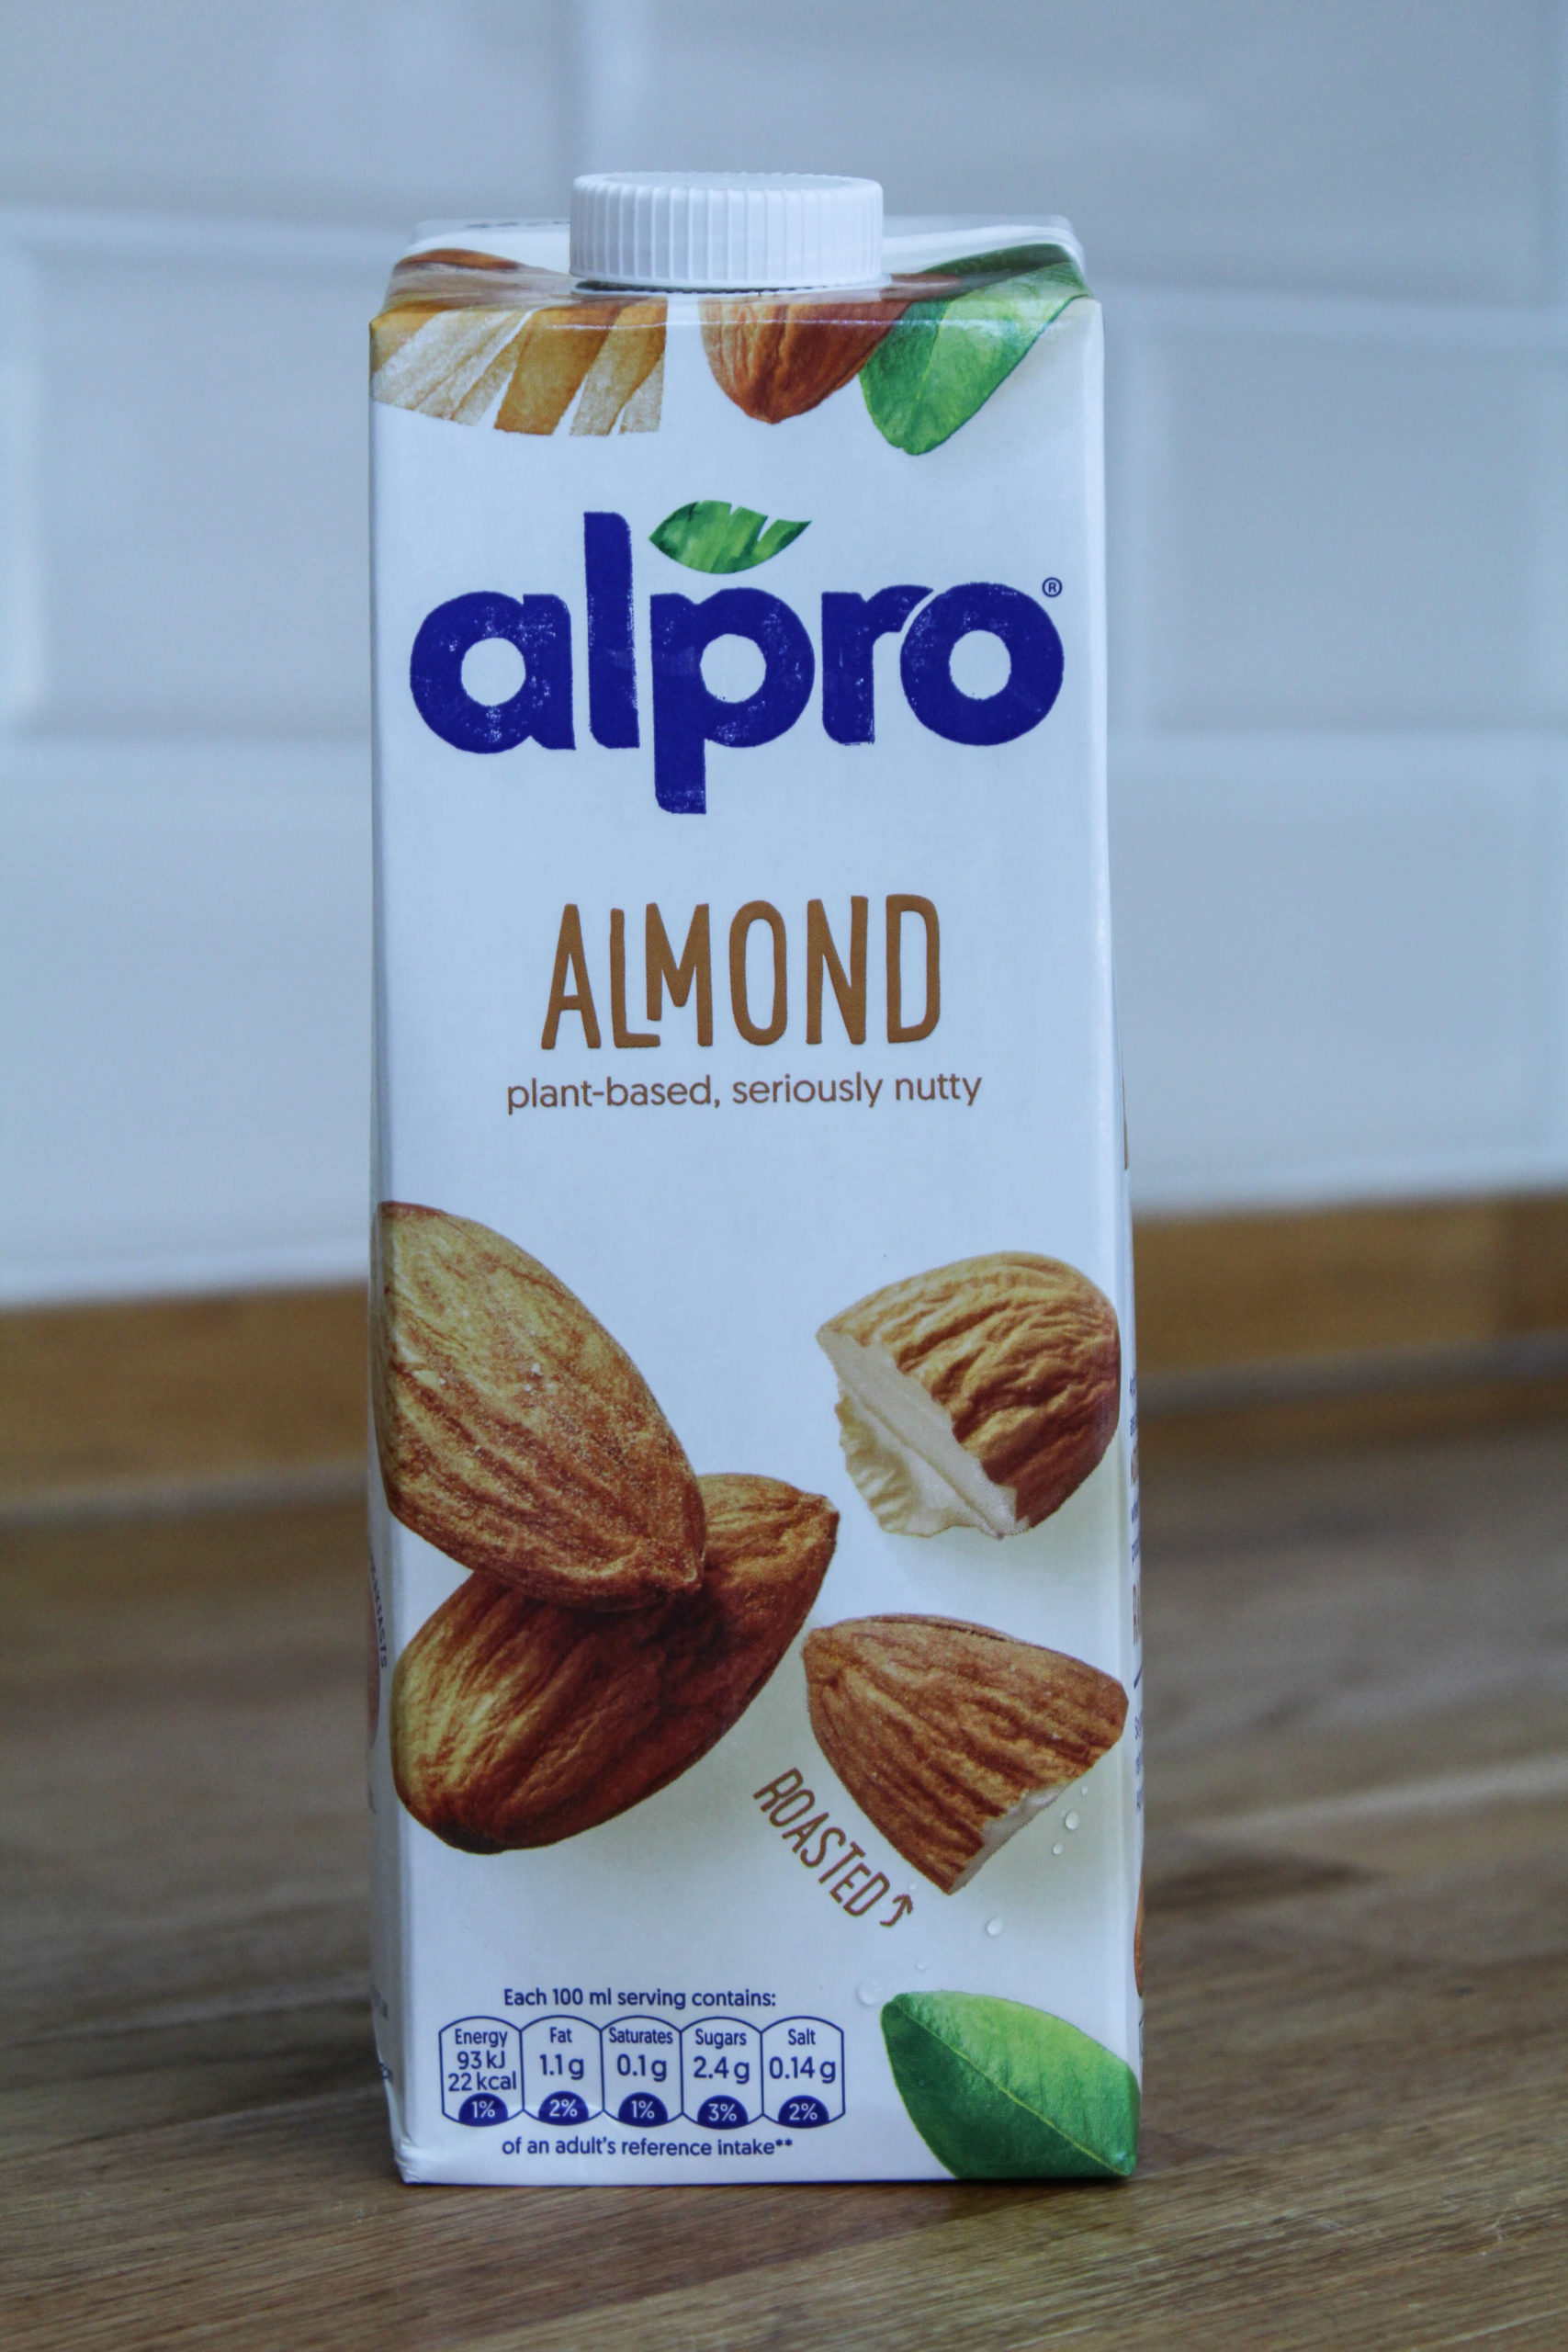 Alpro on X: Alpro Barista Almond for your morning coffee. Match